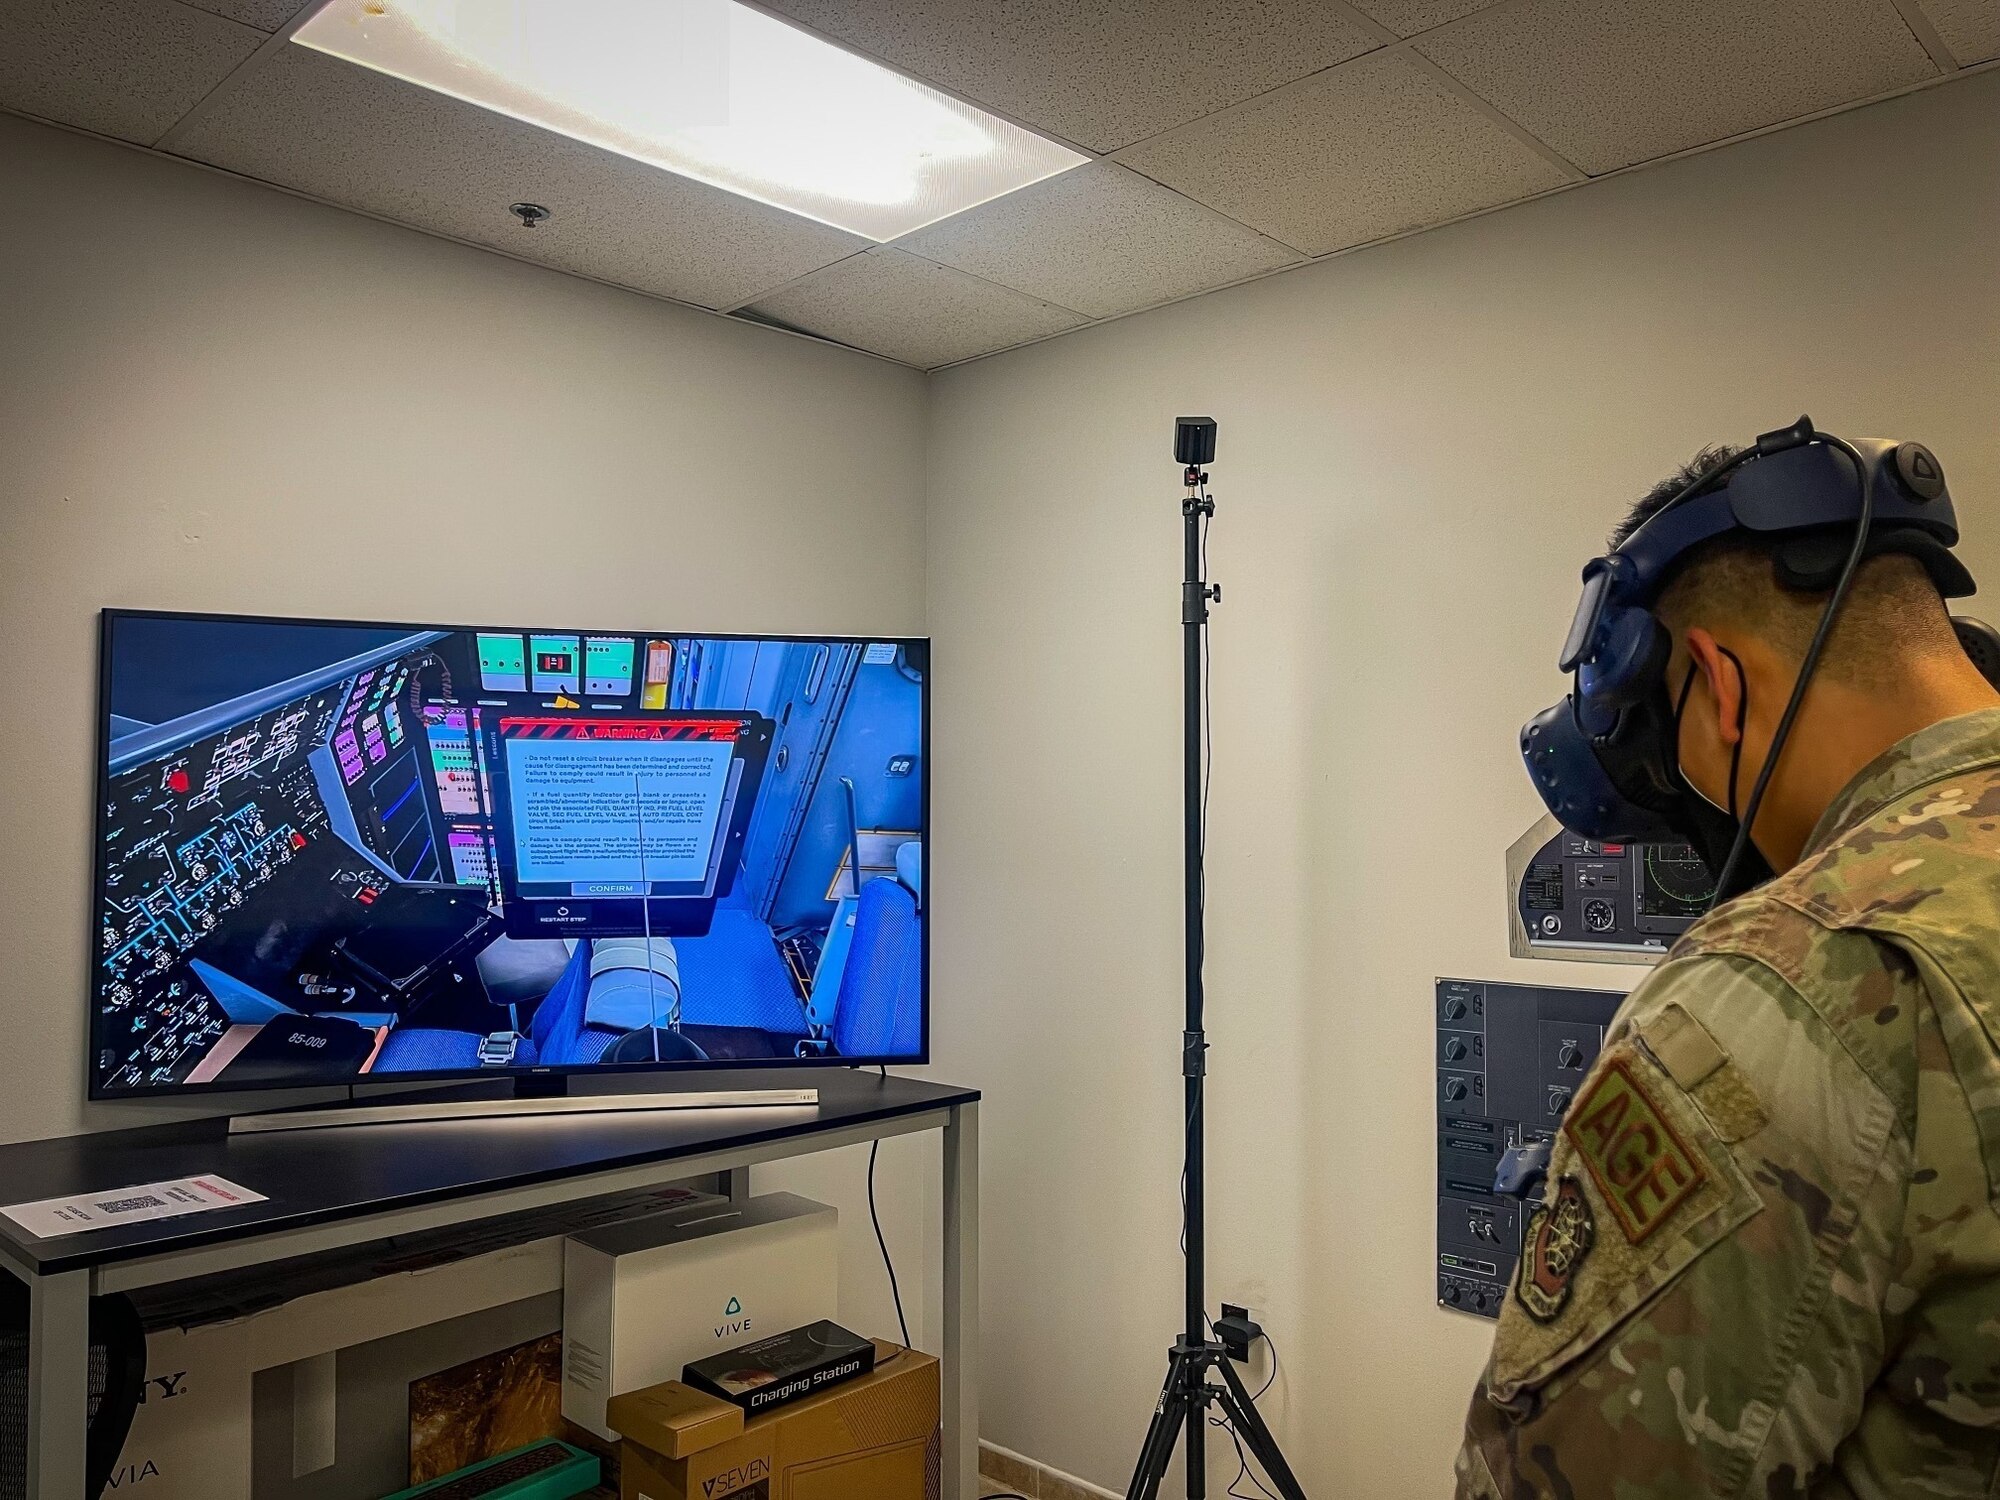 Staff Sgt. Reynaldo Guevarra, 725th Air Mobility Squadron (AMS) aerospace ground equipment craftsman, learns the duties of a crew chief via virtual training during a multi- capable airman (MCA) exercise at Naval Station Rota, Spain, Feb. 11, 2022. During the weeklong MCA exercise, 725th AMS participated in a familiarization of new tasks using real equipment as well as virtual reality training tools. An MCA is critical to enabling agile combat employment, which is a proactive and reactive operational scheme of maneuver designed to address the challenges of projecting combat power across the globe with a significantly reduced global footprint, increased risk from adversarial technological advances, and fiscal and political constraints. (Courtesy photo)